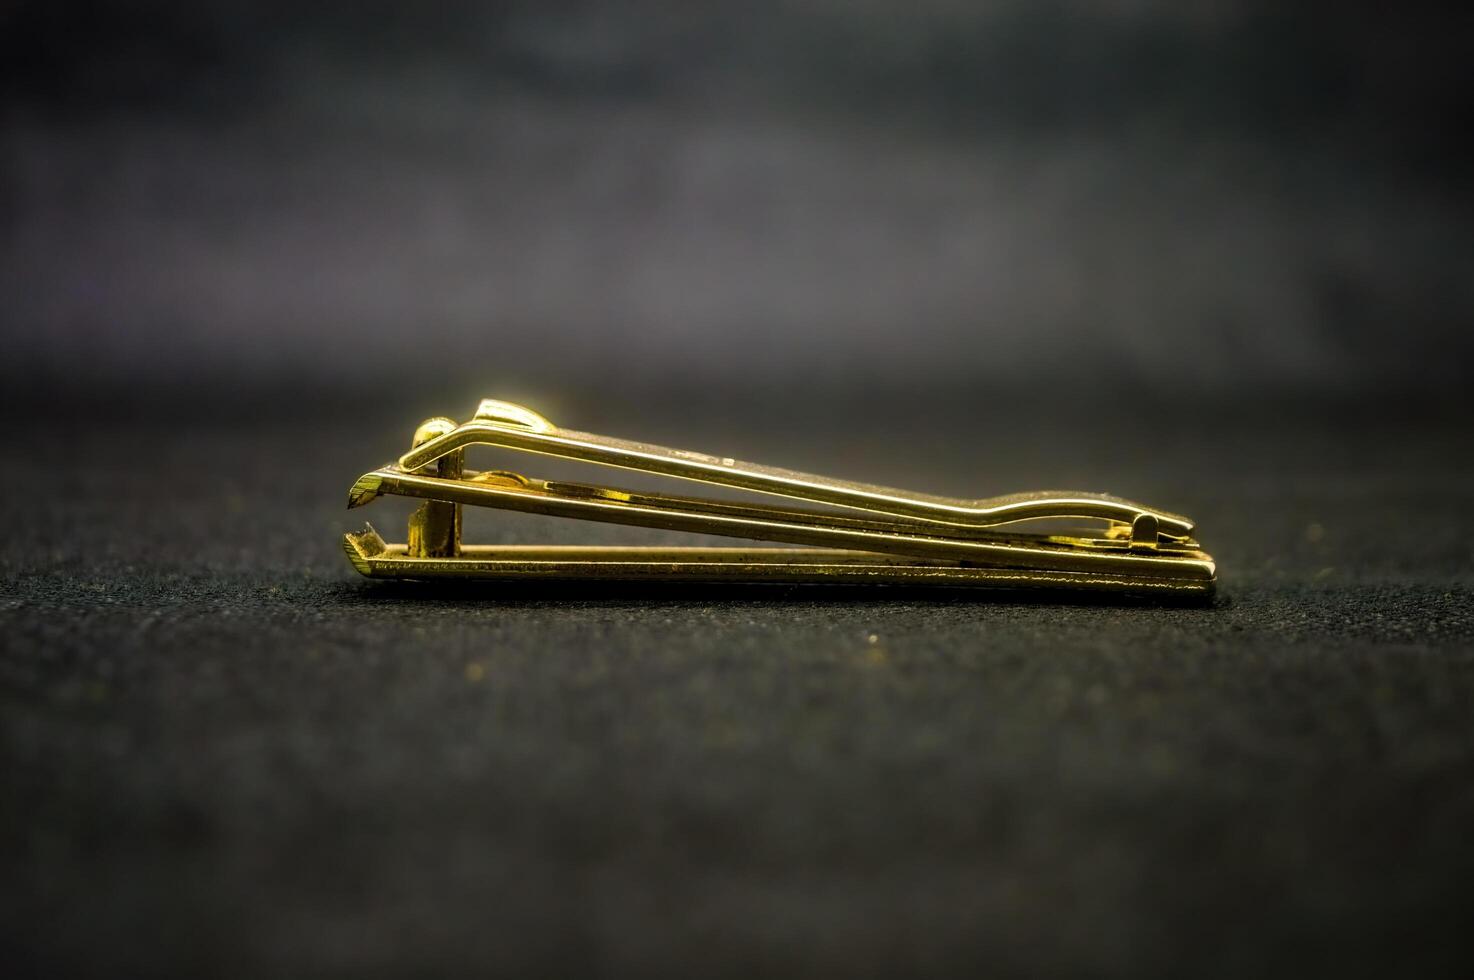 a gold nail clipper isolated on black background photo